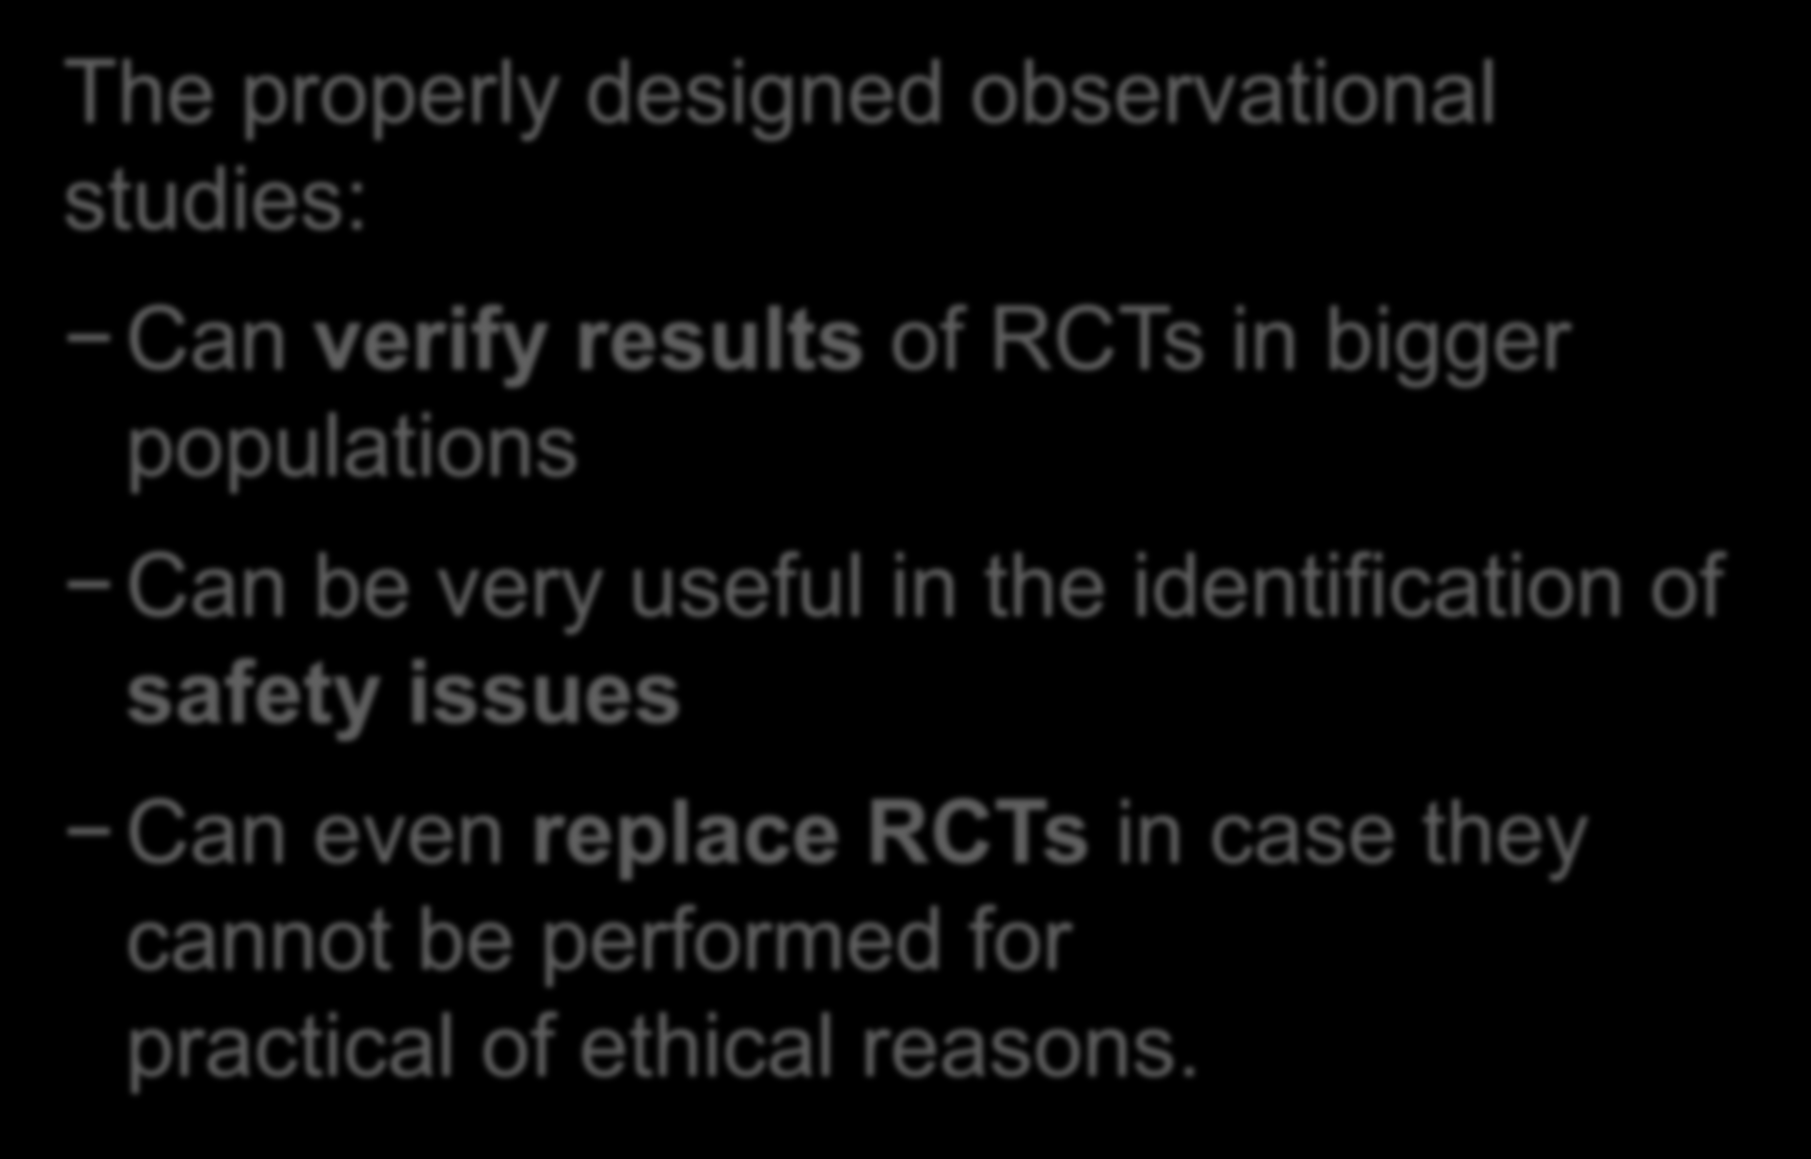 Observational Studies (RWE) The properly designed observational studies: Can verify results of RCTs in bigger populations Can be very